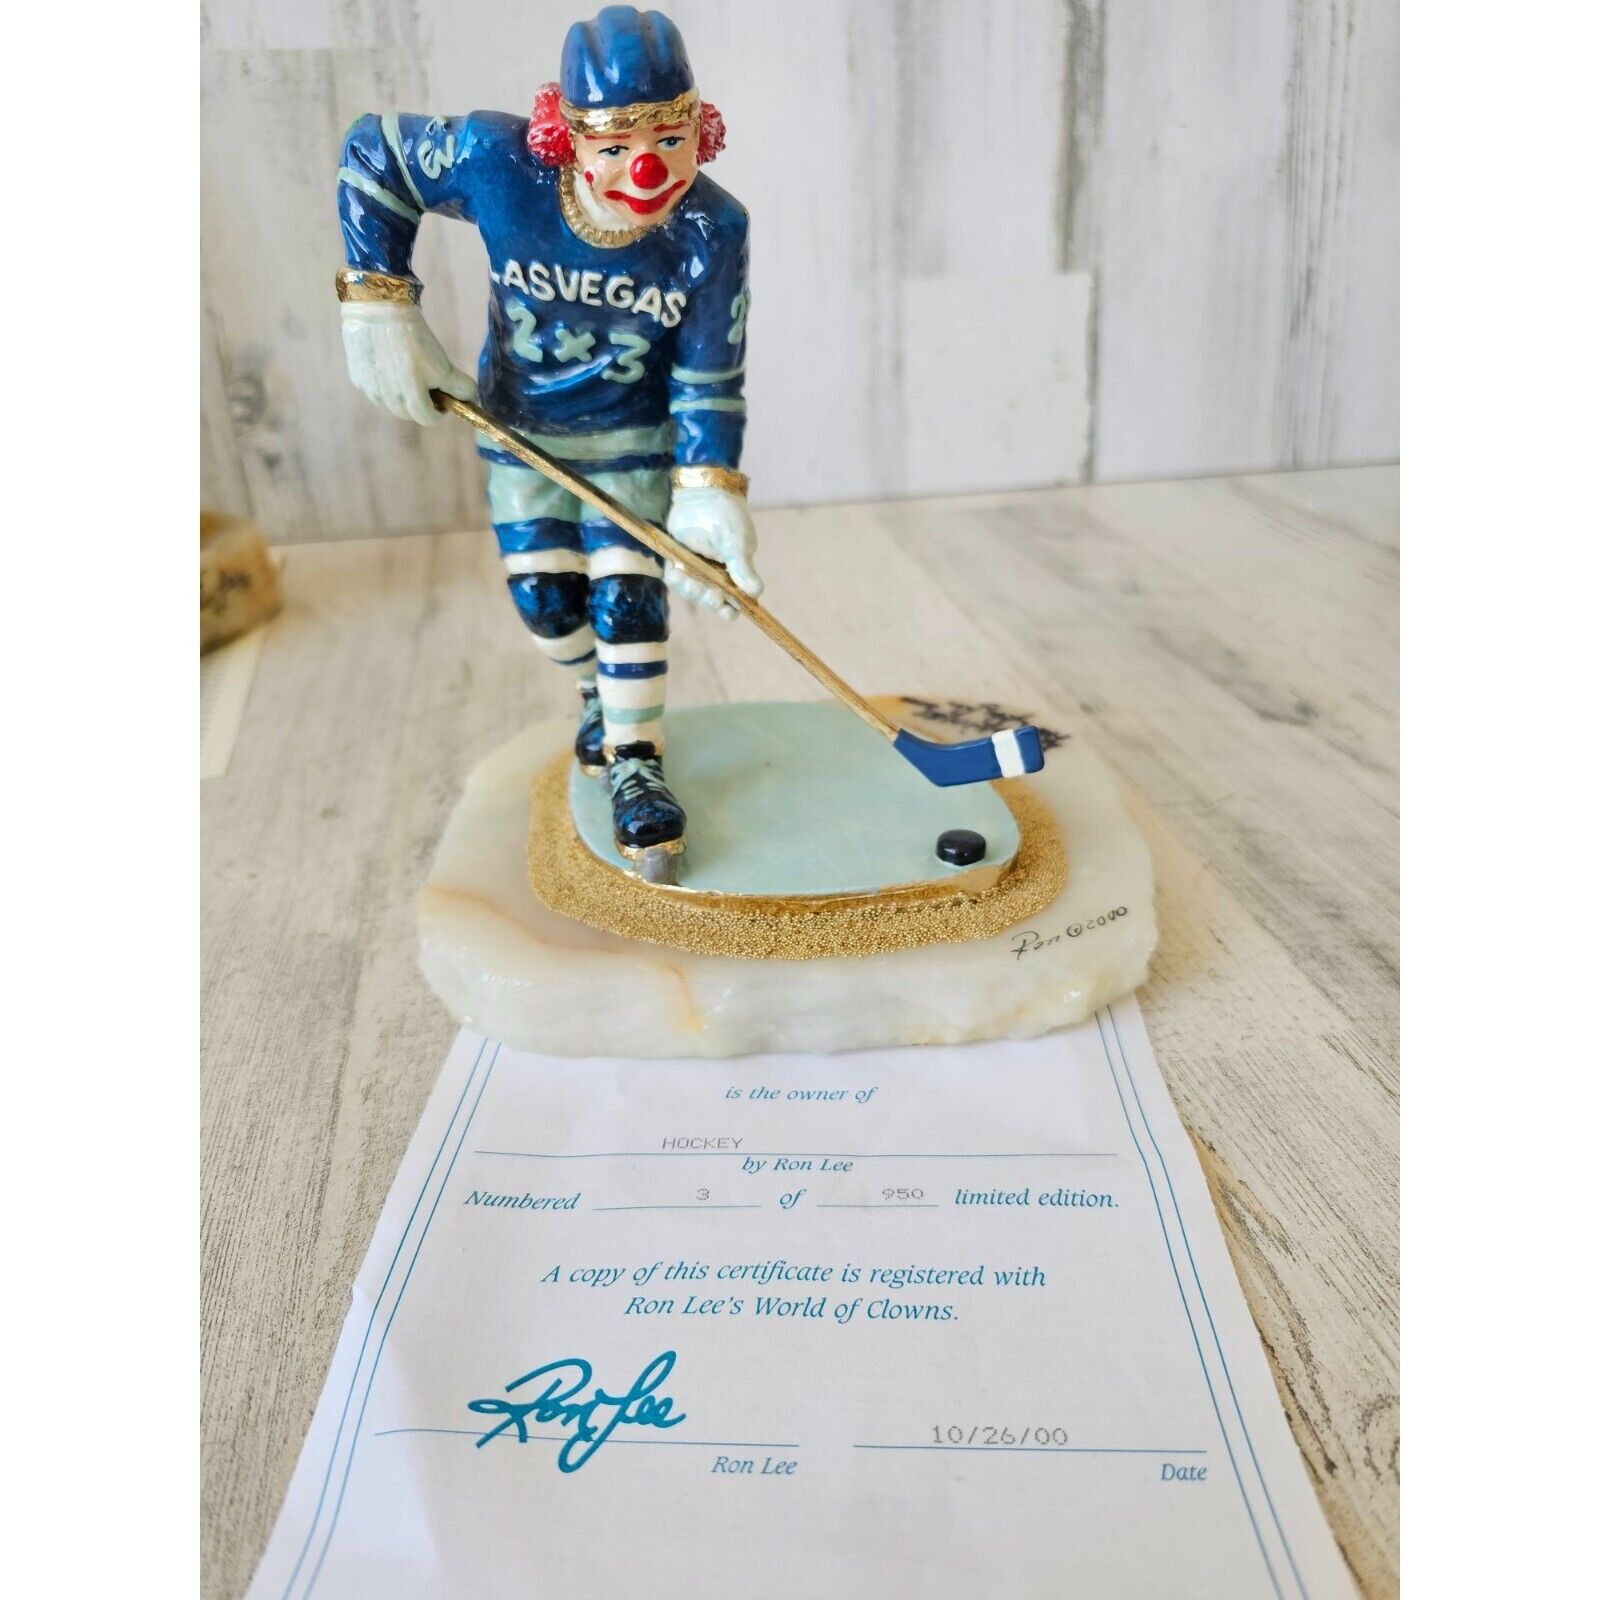 Ron Lee clown hockey player vintage limited 2000 gold figurine statue three of 9